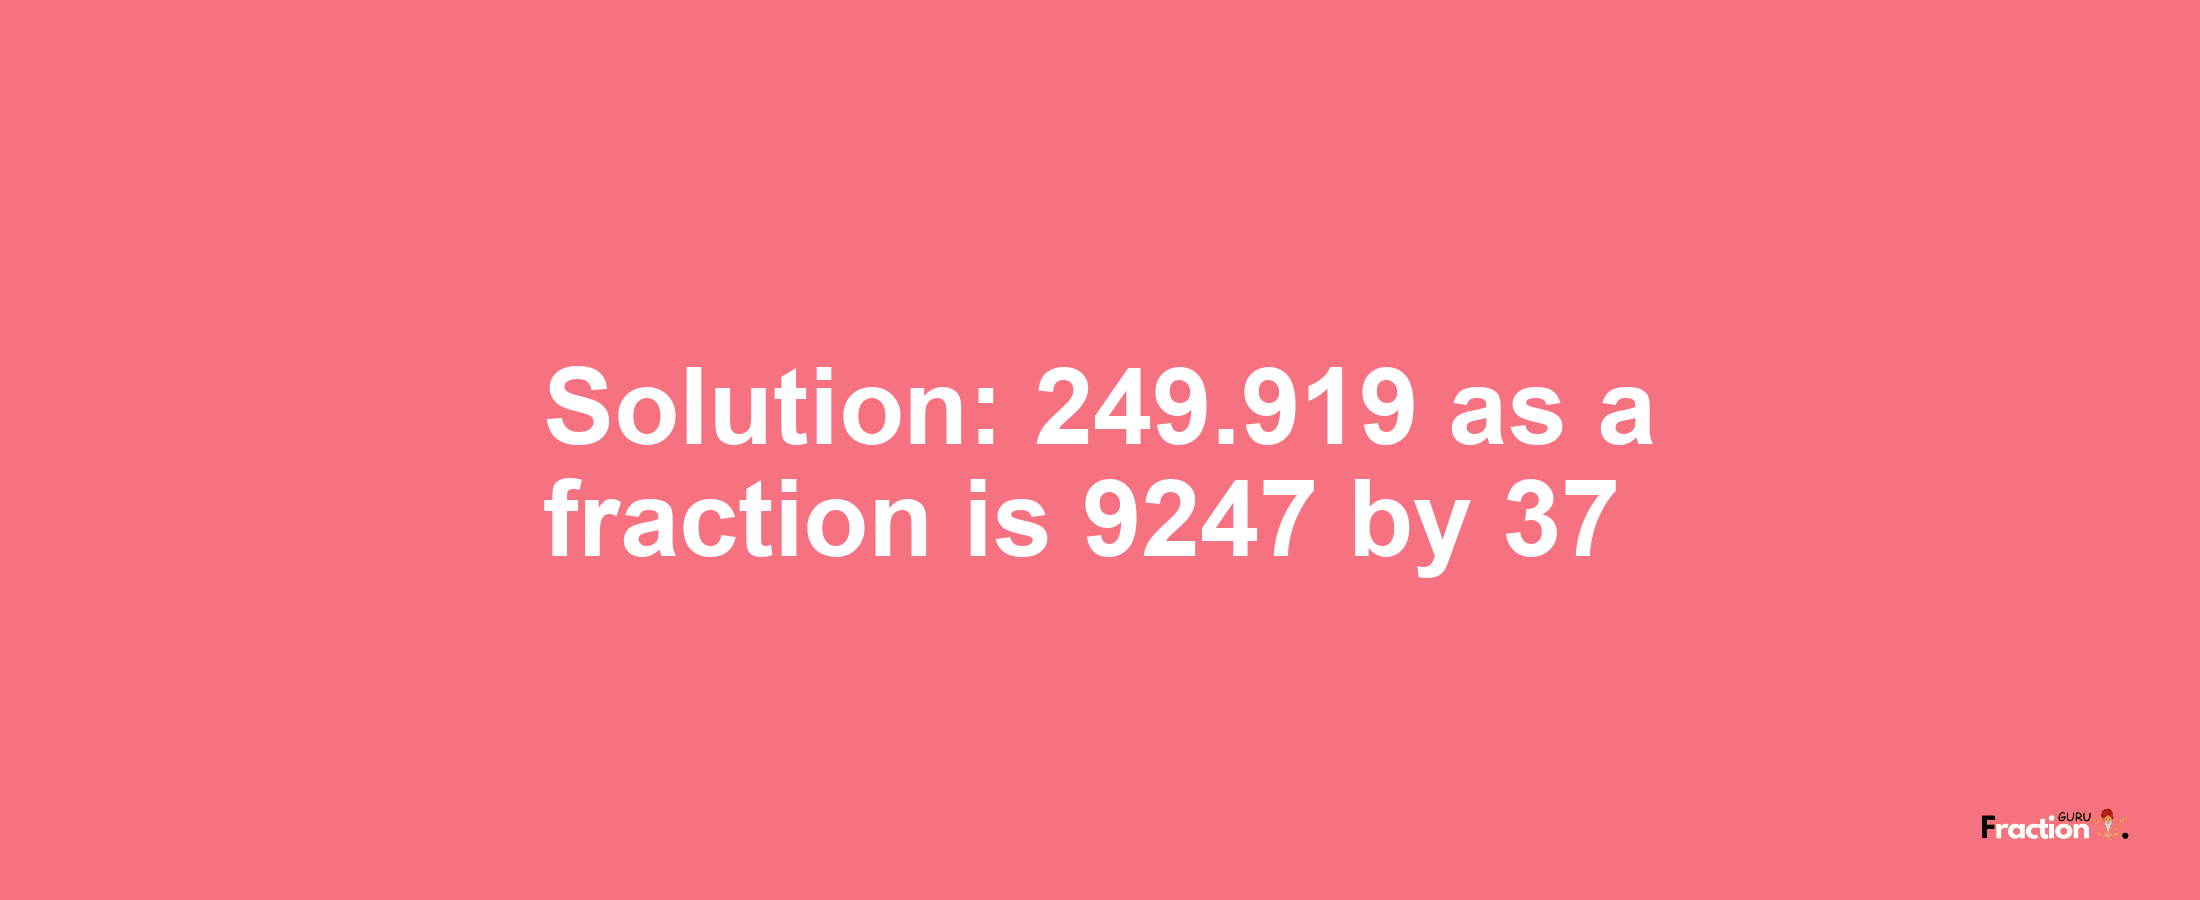 Solution:249.919 as a fraction is 9247/37